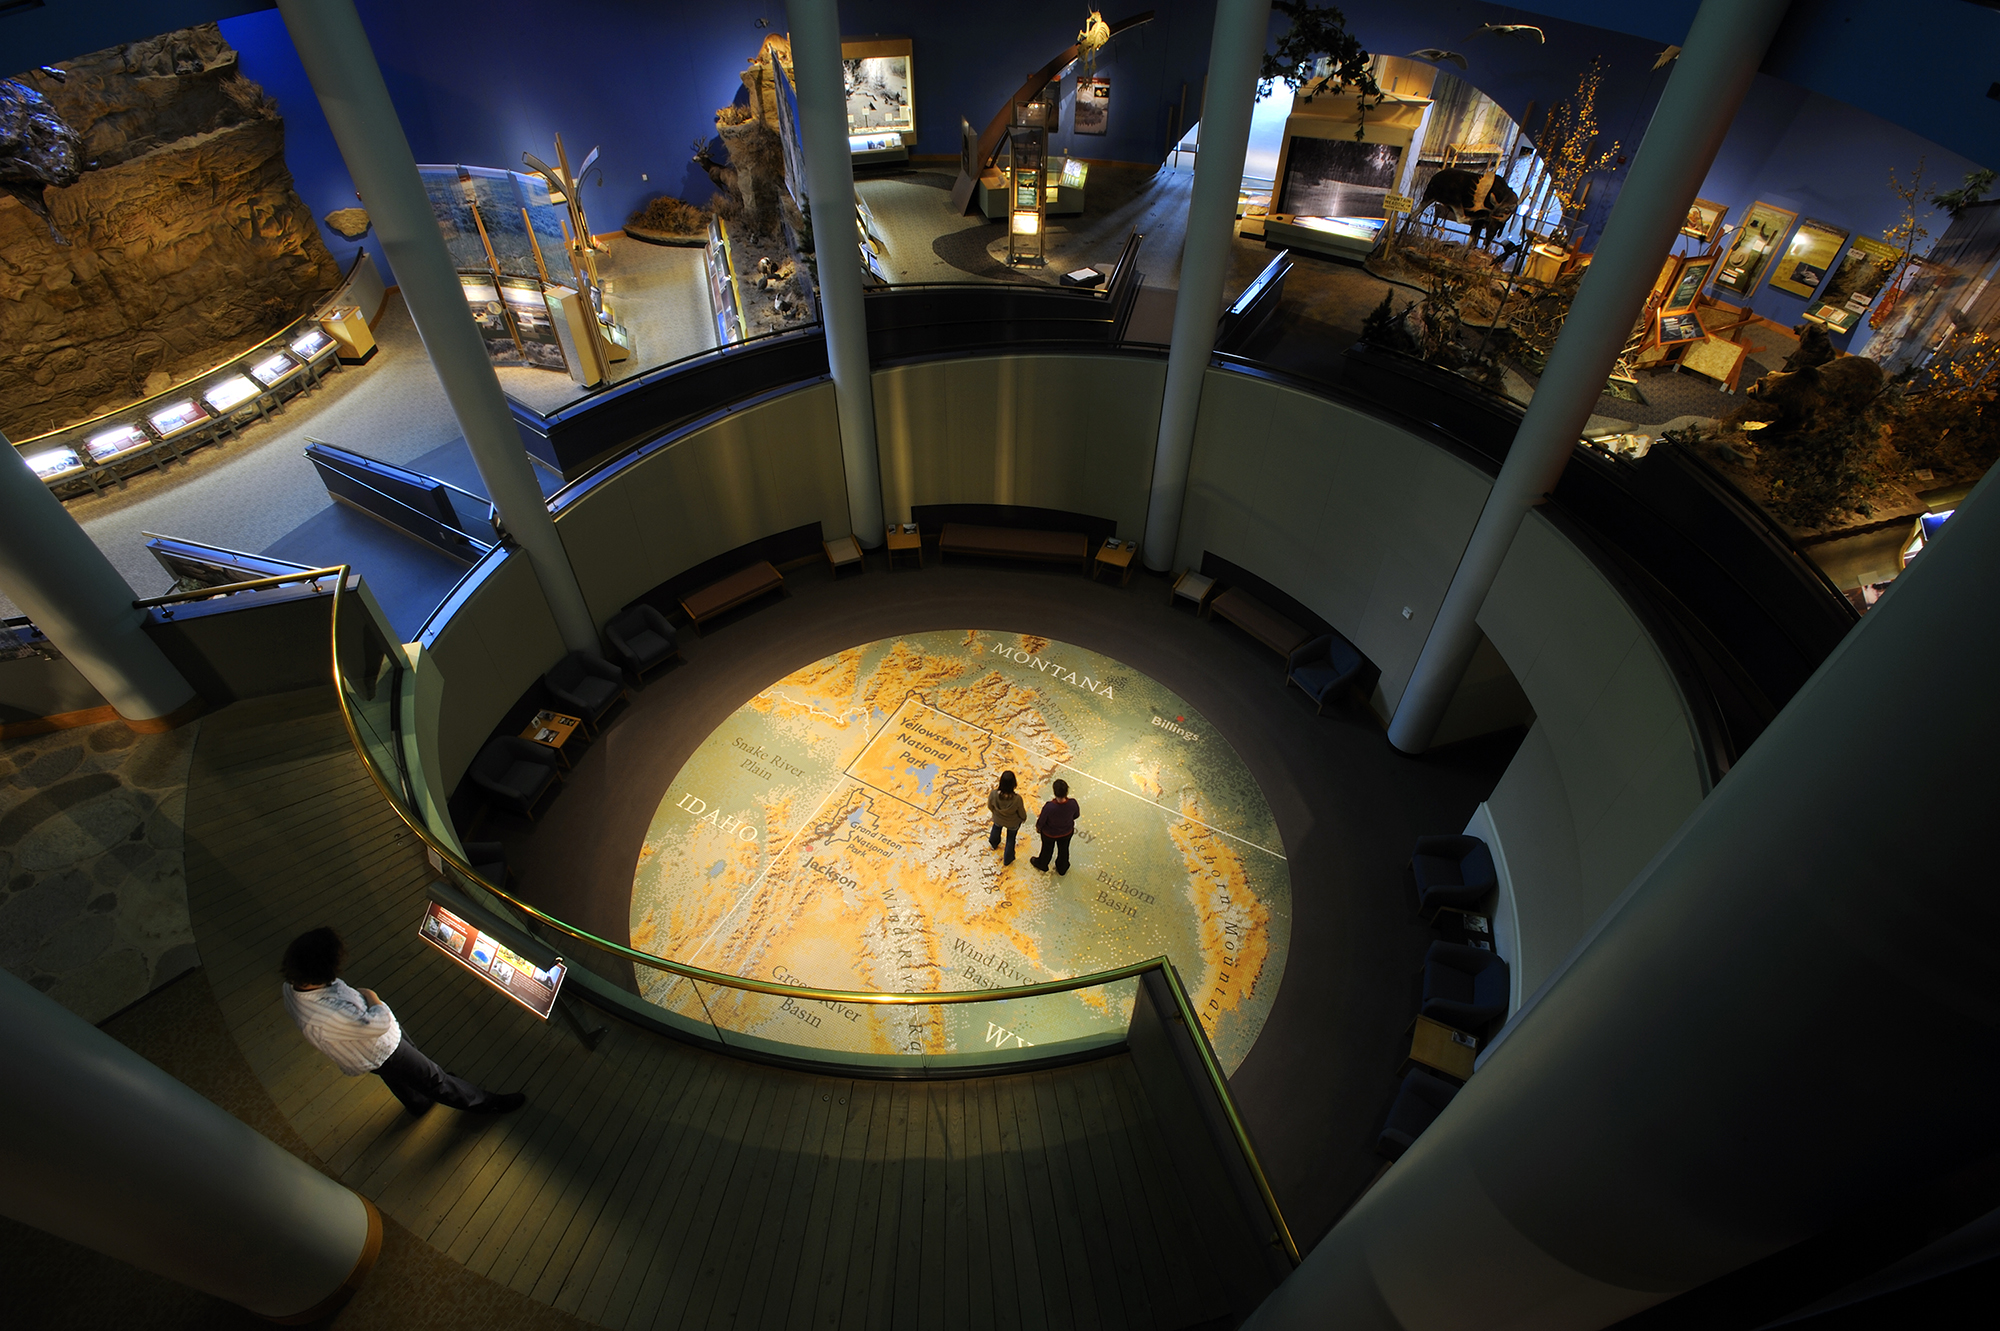 Overview of the Draper Natural History Museum at the Buffalo Bill Center of the West.